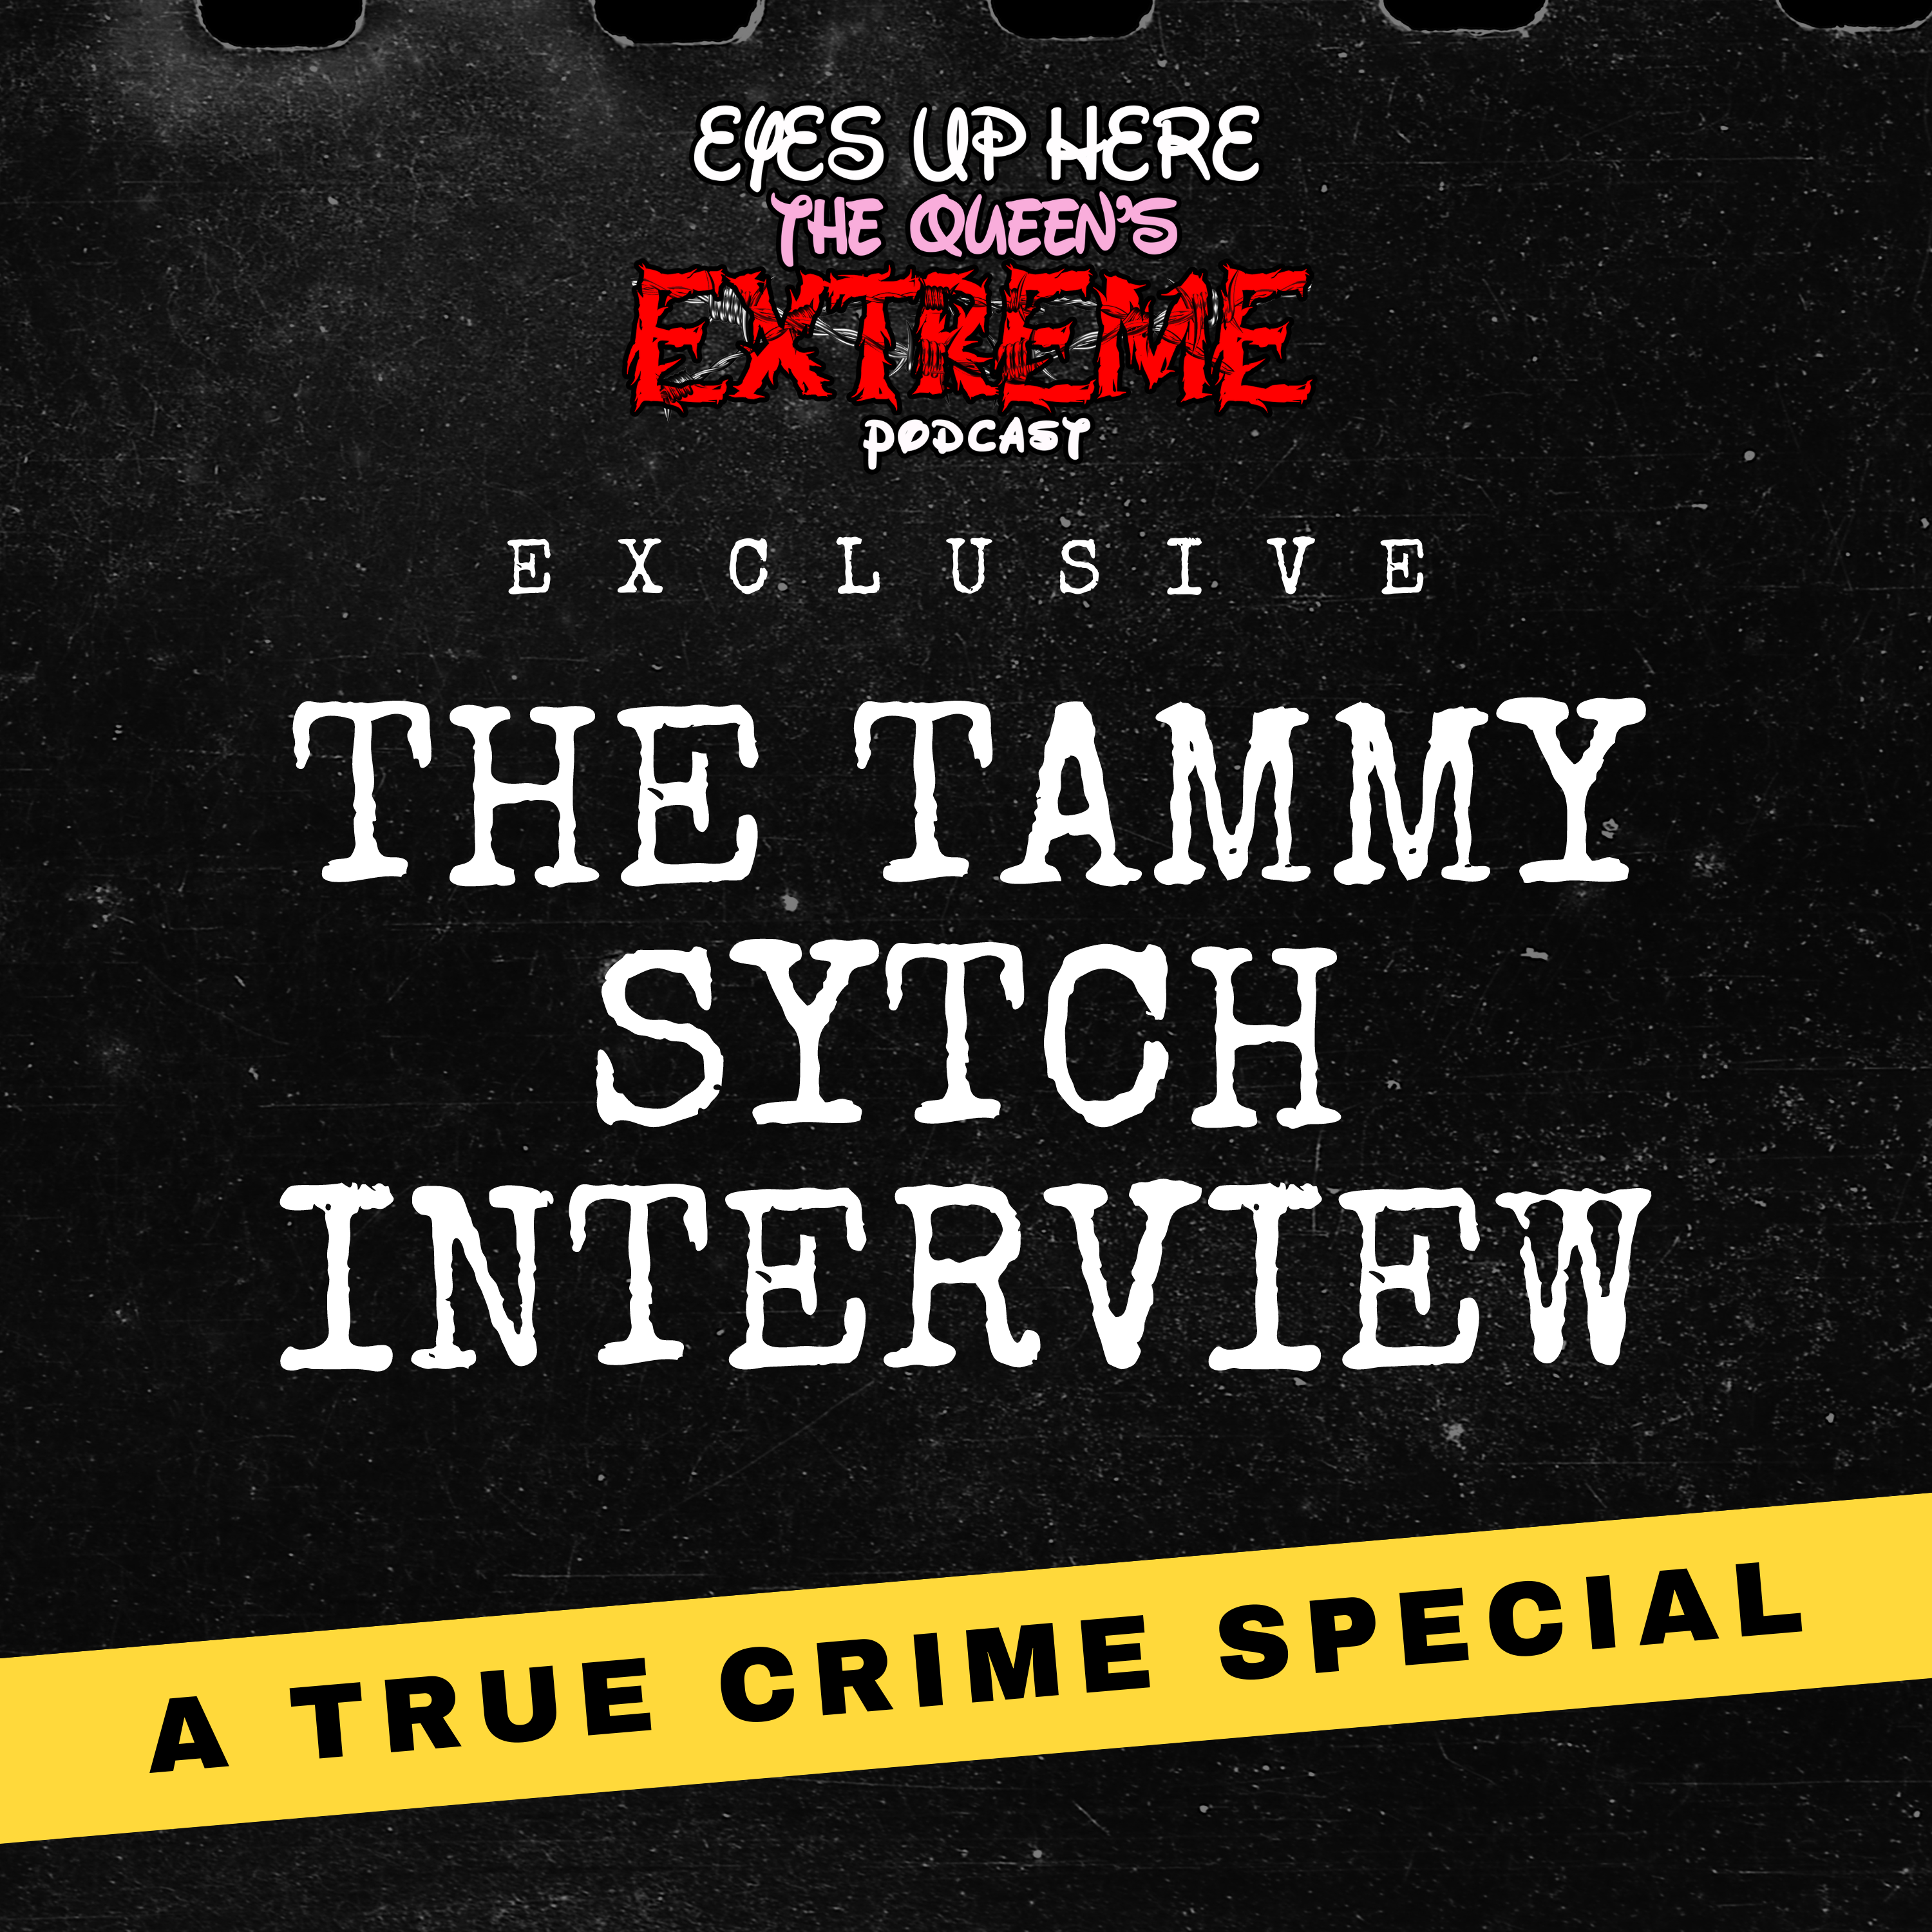 A True Crime Special: The Tammy Sytch Interview